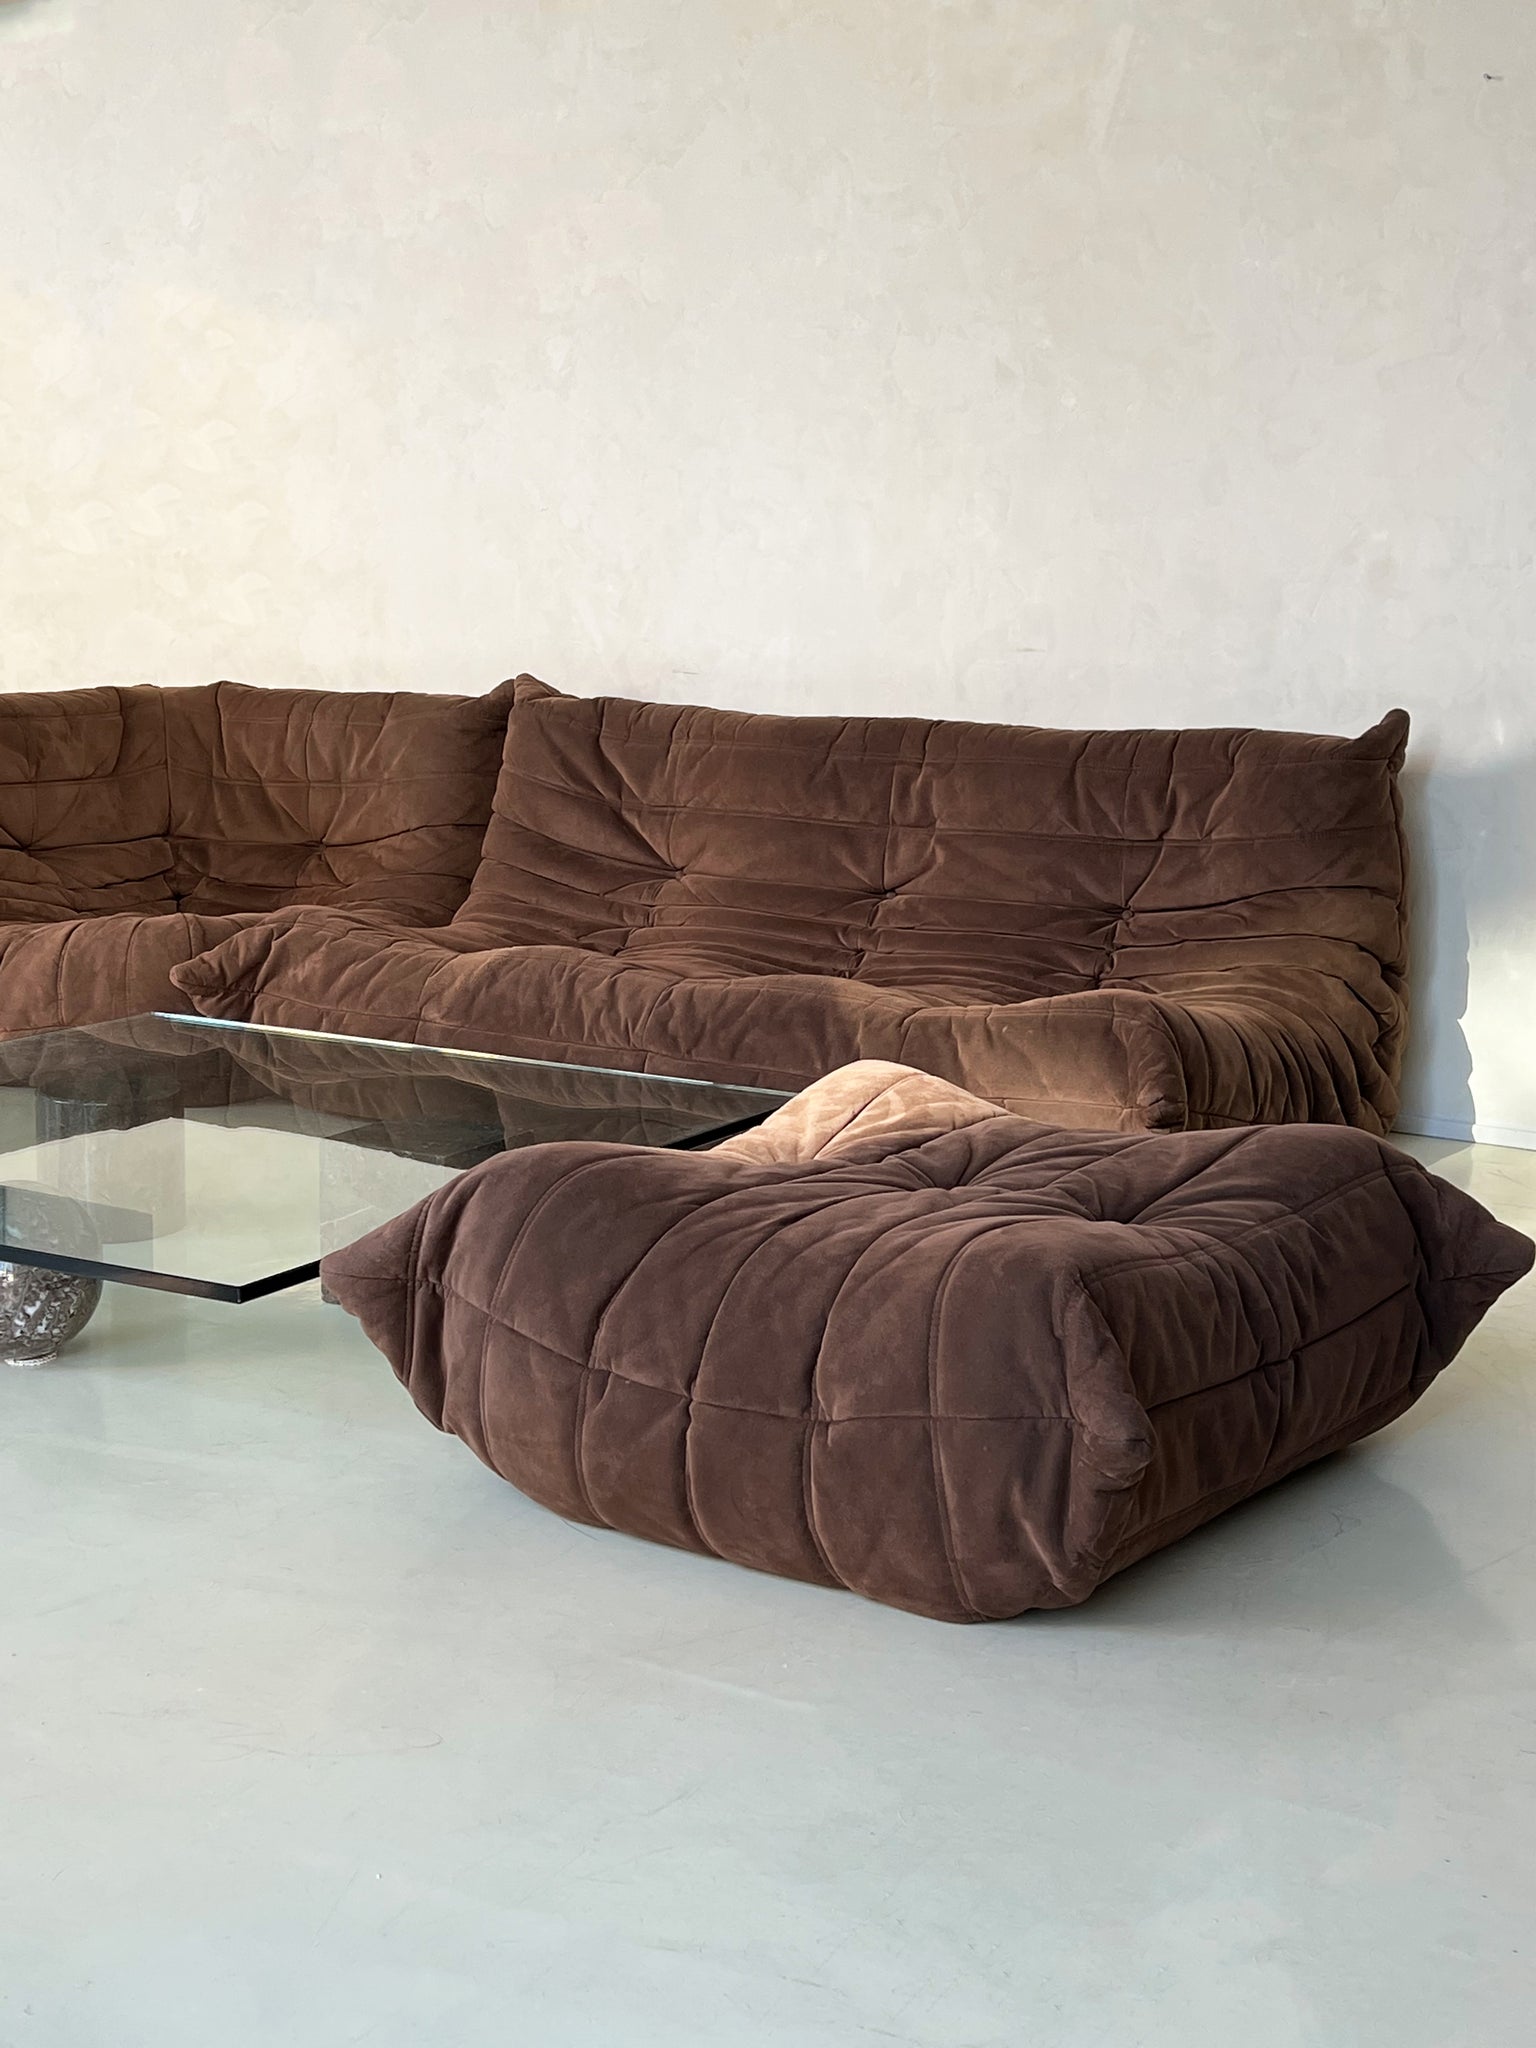 Original brown leather Togo seating group by Michel Ducaroy for